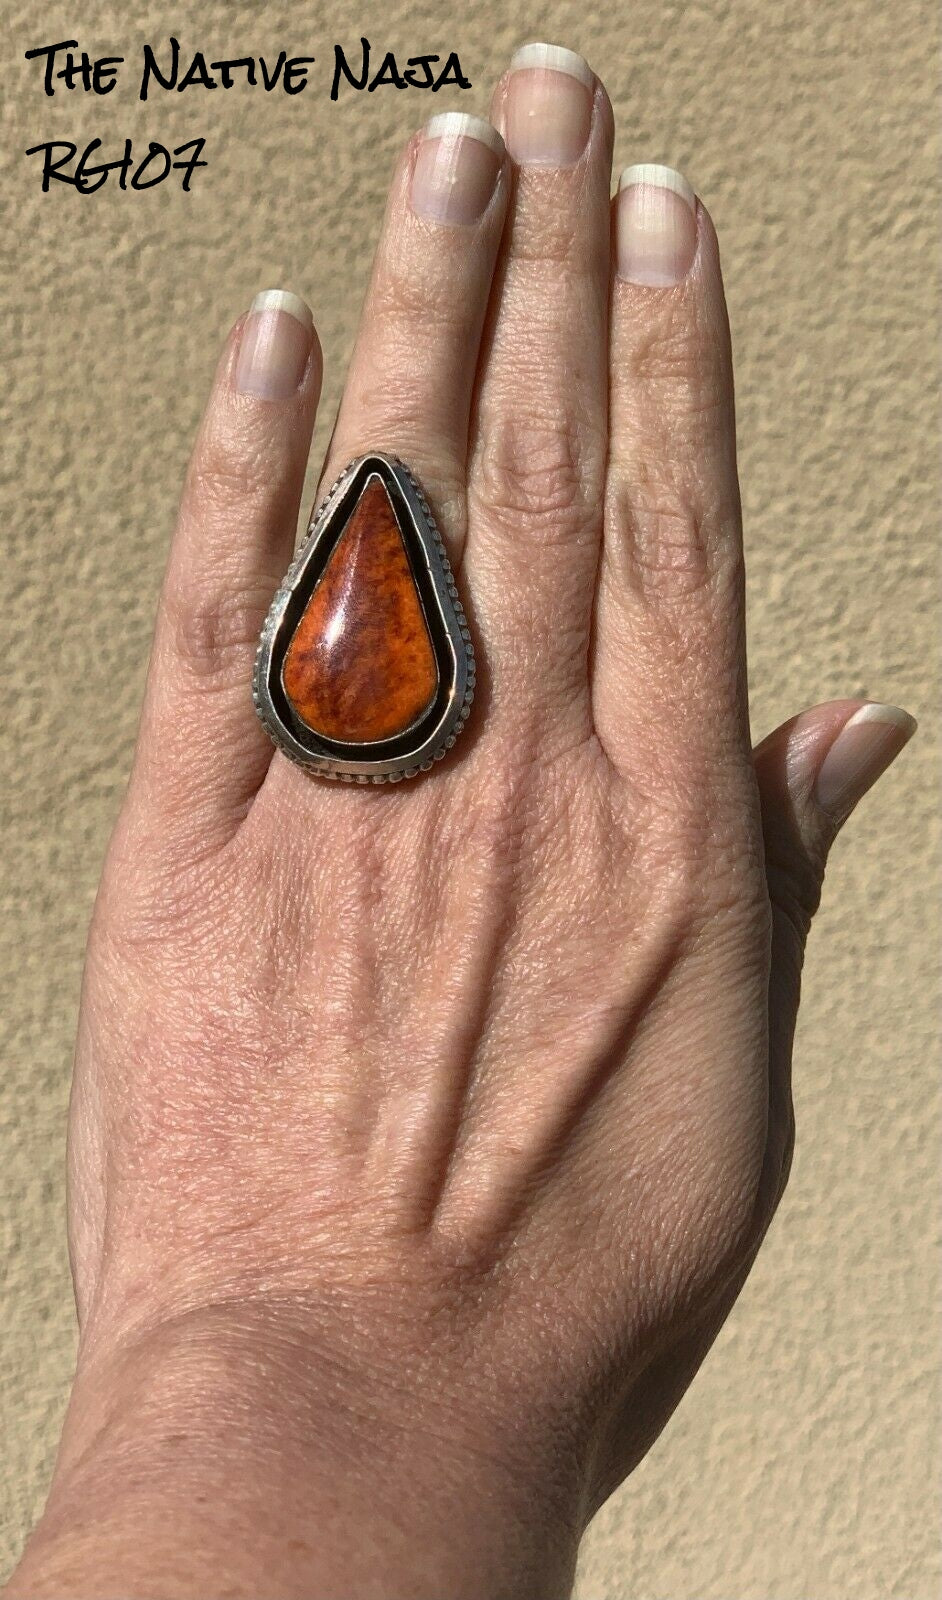 Navajo Chimney Butte Sterling Silver & Spiny Oyster Teardrop Ring Size 6 1/4 RG107